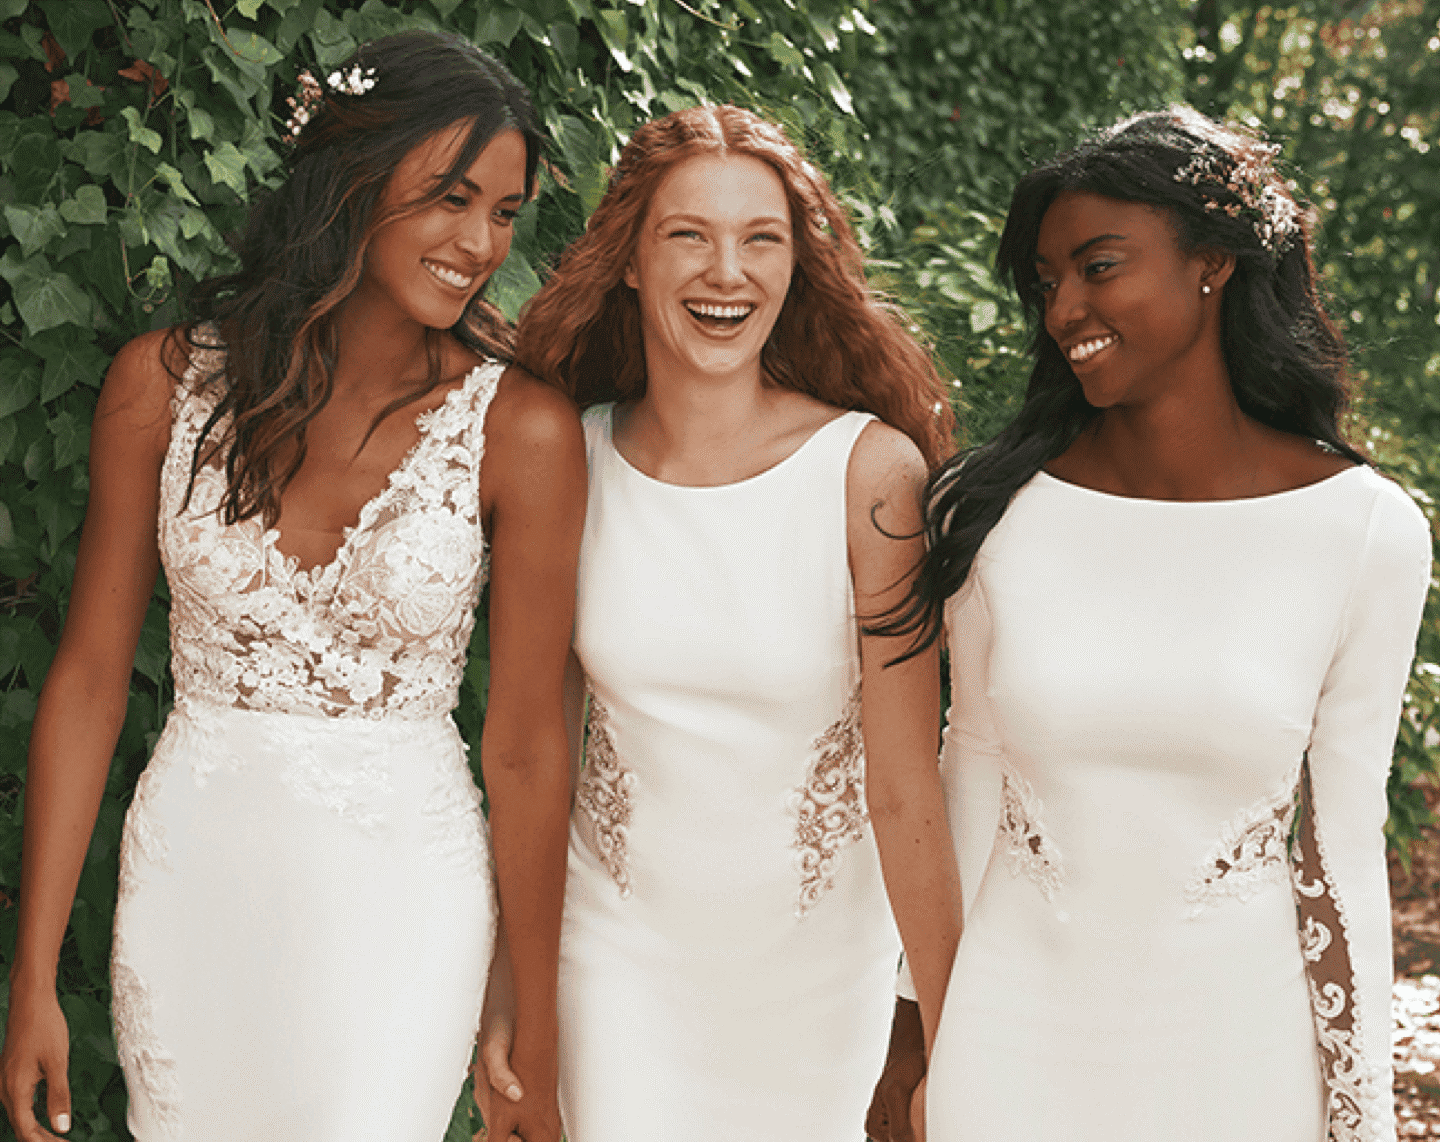 The Consortium of Investors Led by Bain Capital and MV Credit Acquires the Majority Stock of Barcelona-based Premium Bridalwear Brand Pronovias Group